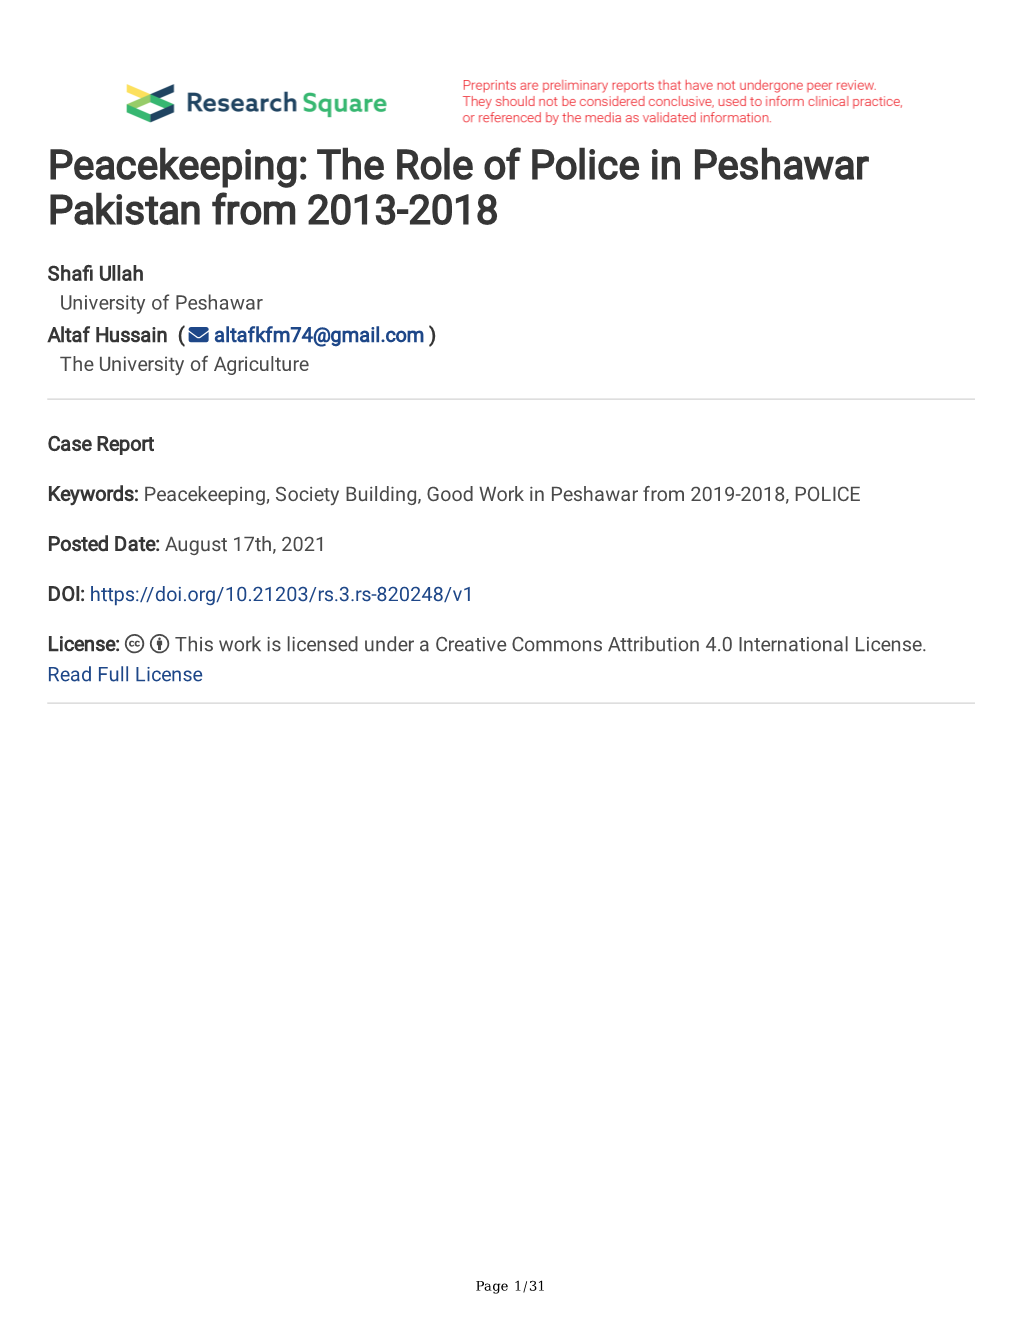 Peacekeeping: the Role of Police in Peshawar Pakistan from 2013-2018